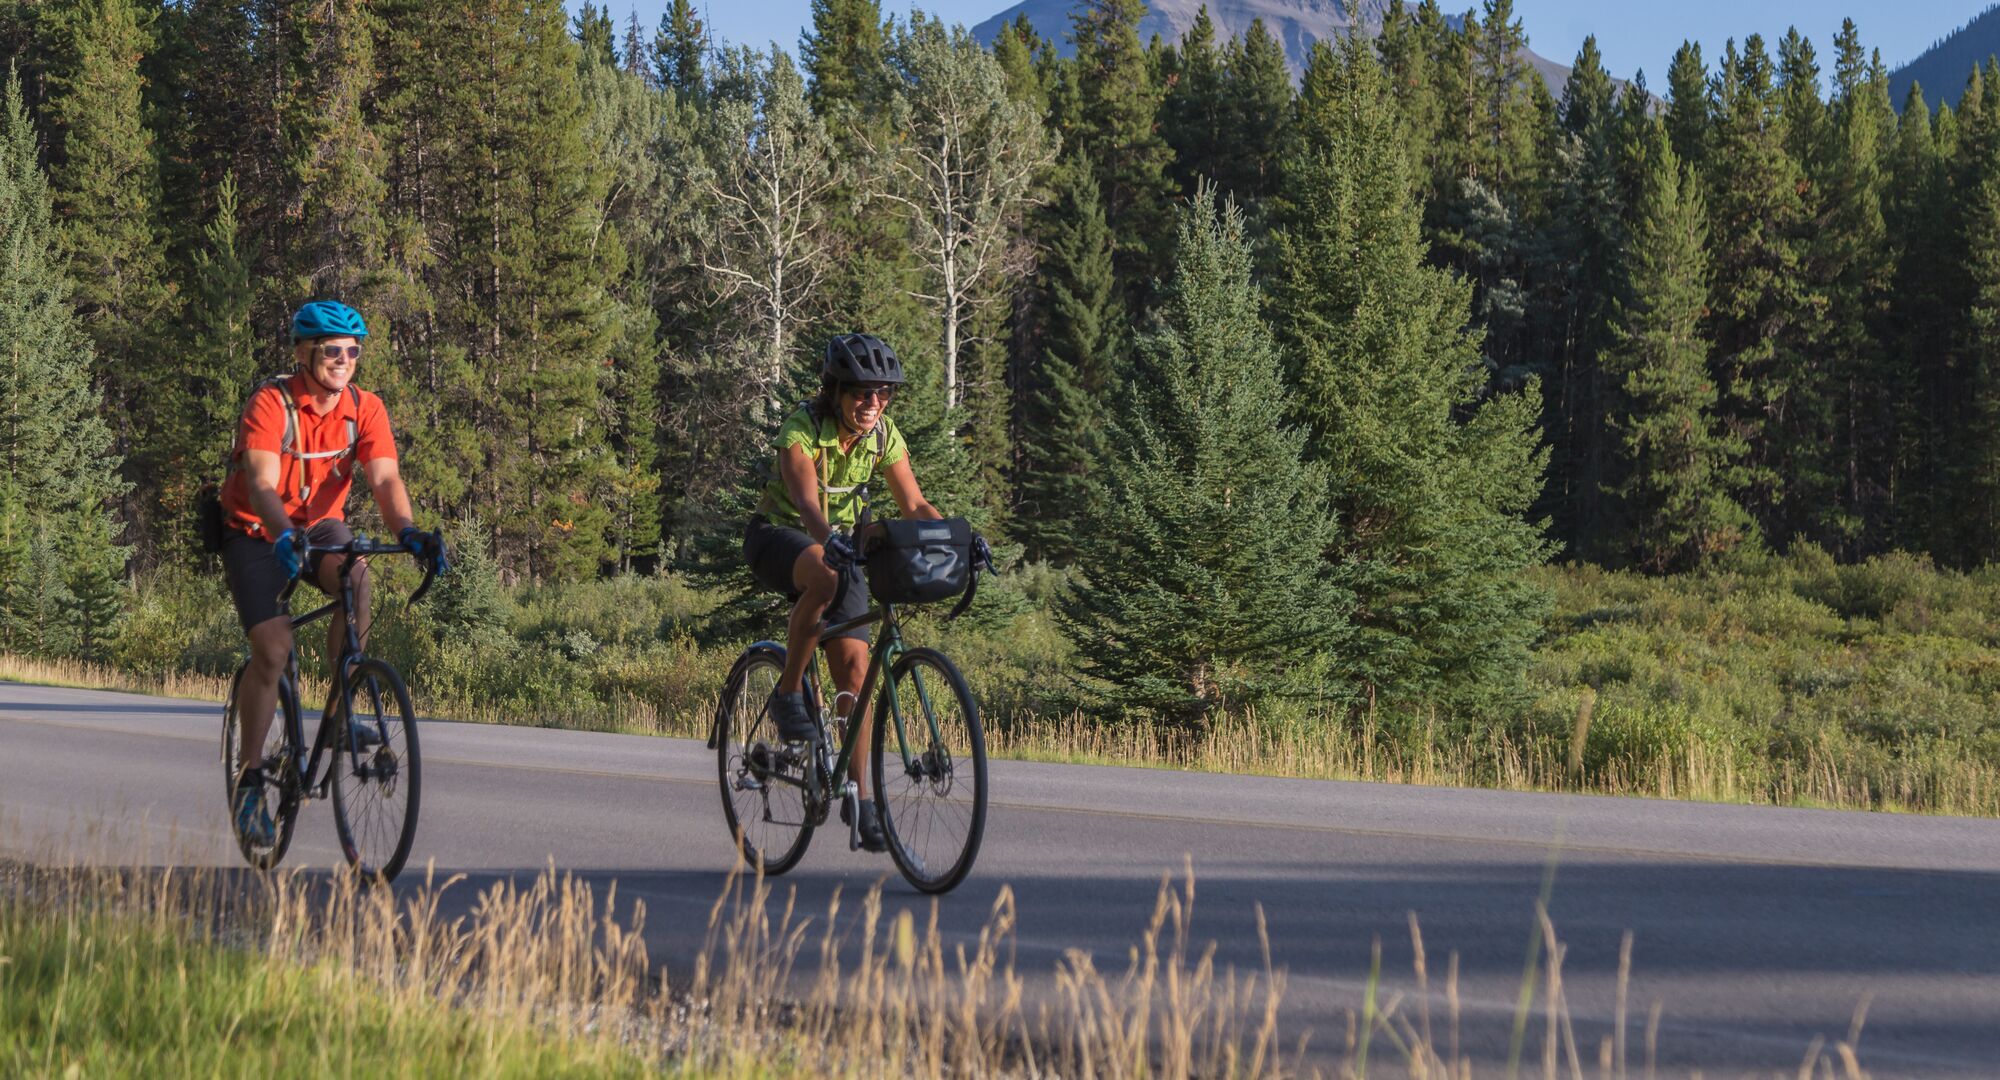 Two people road cycling the Bow Valley Parkway in Banff National Park